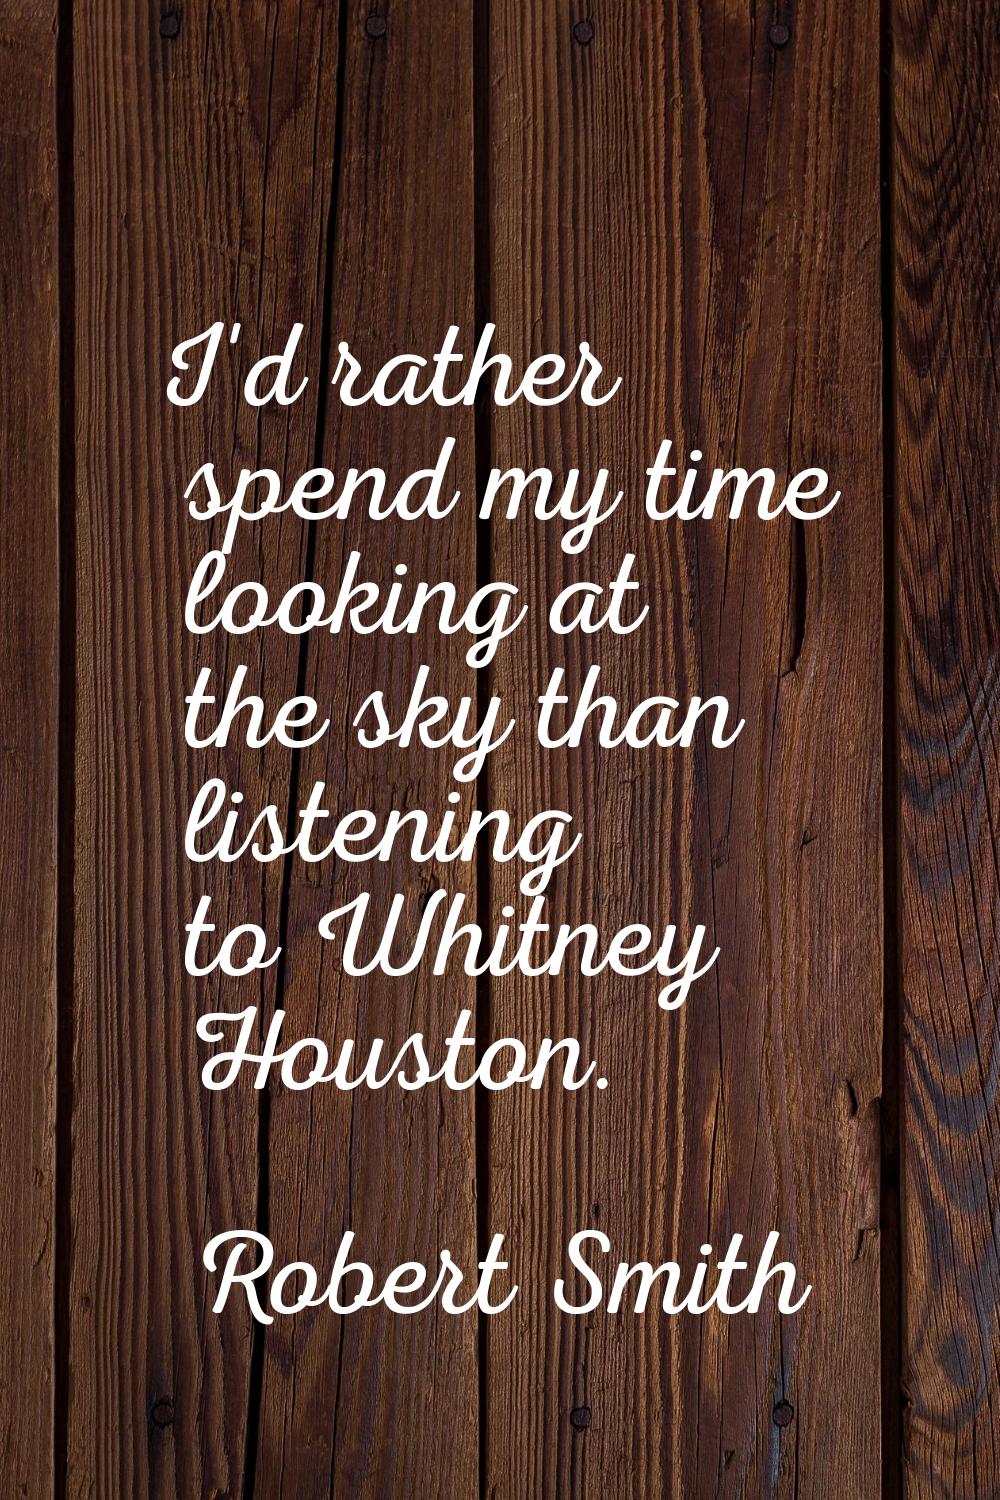 I'd rather spend my time looking at the sky than listening to Whitney Houston.